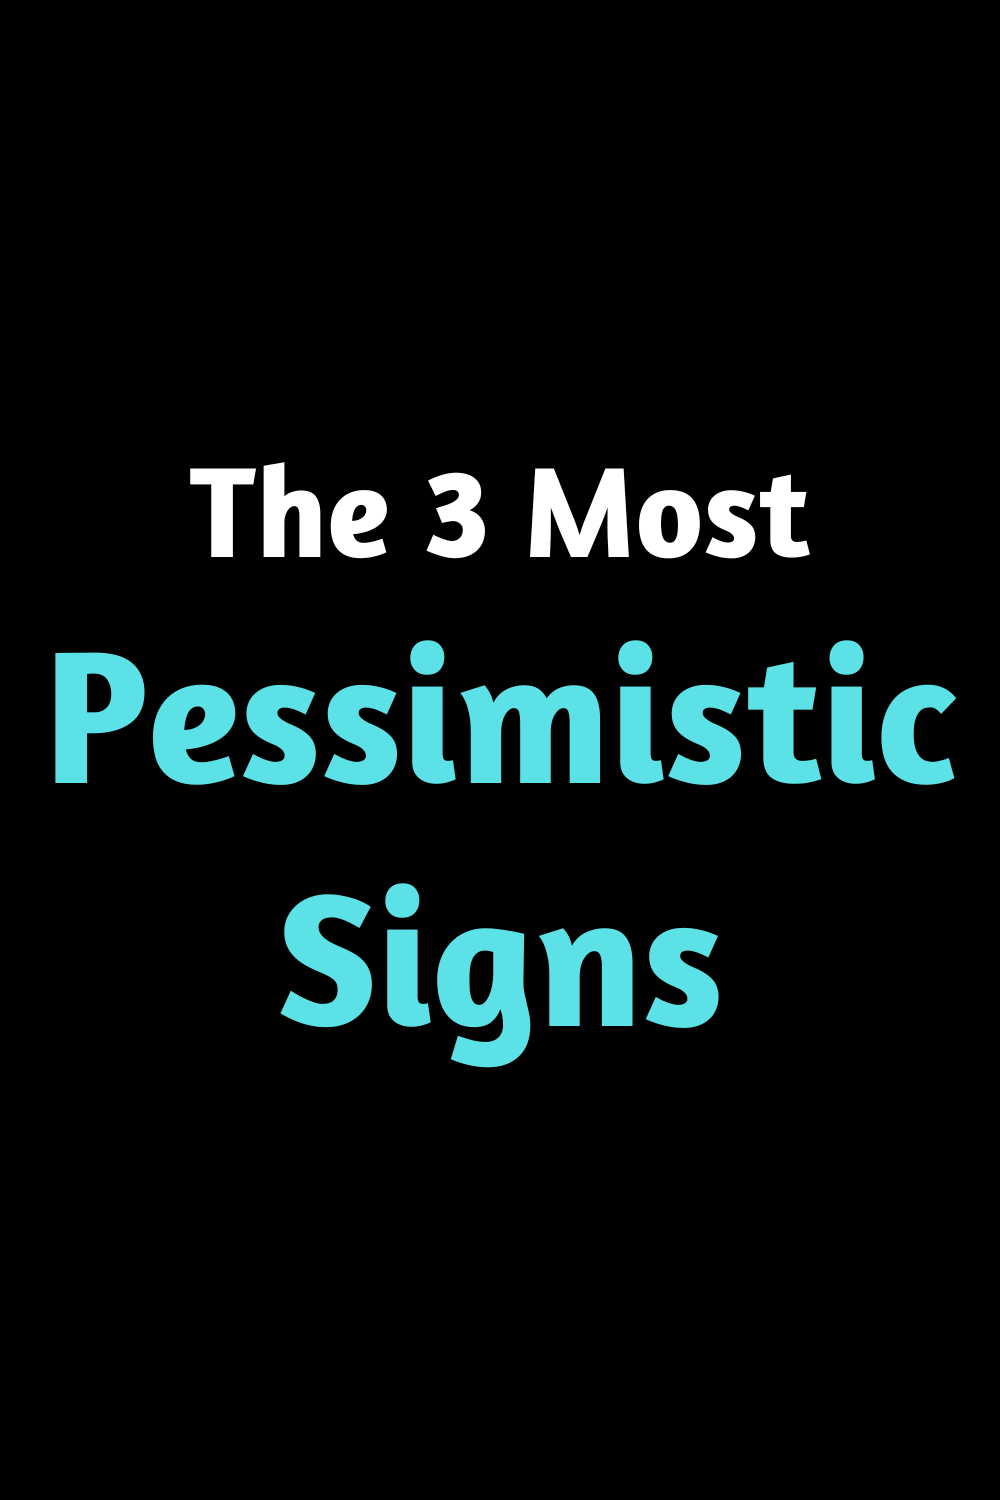 The 3 Most Pessimistic Signs